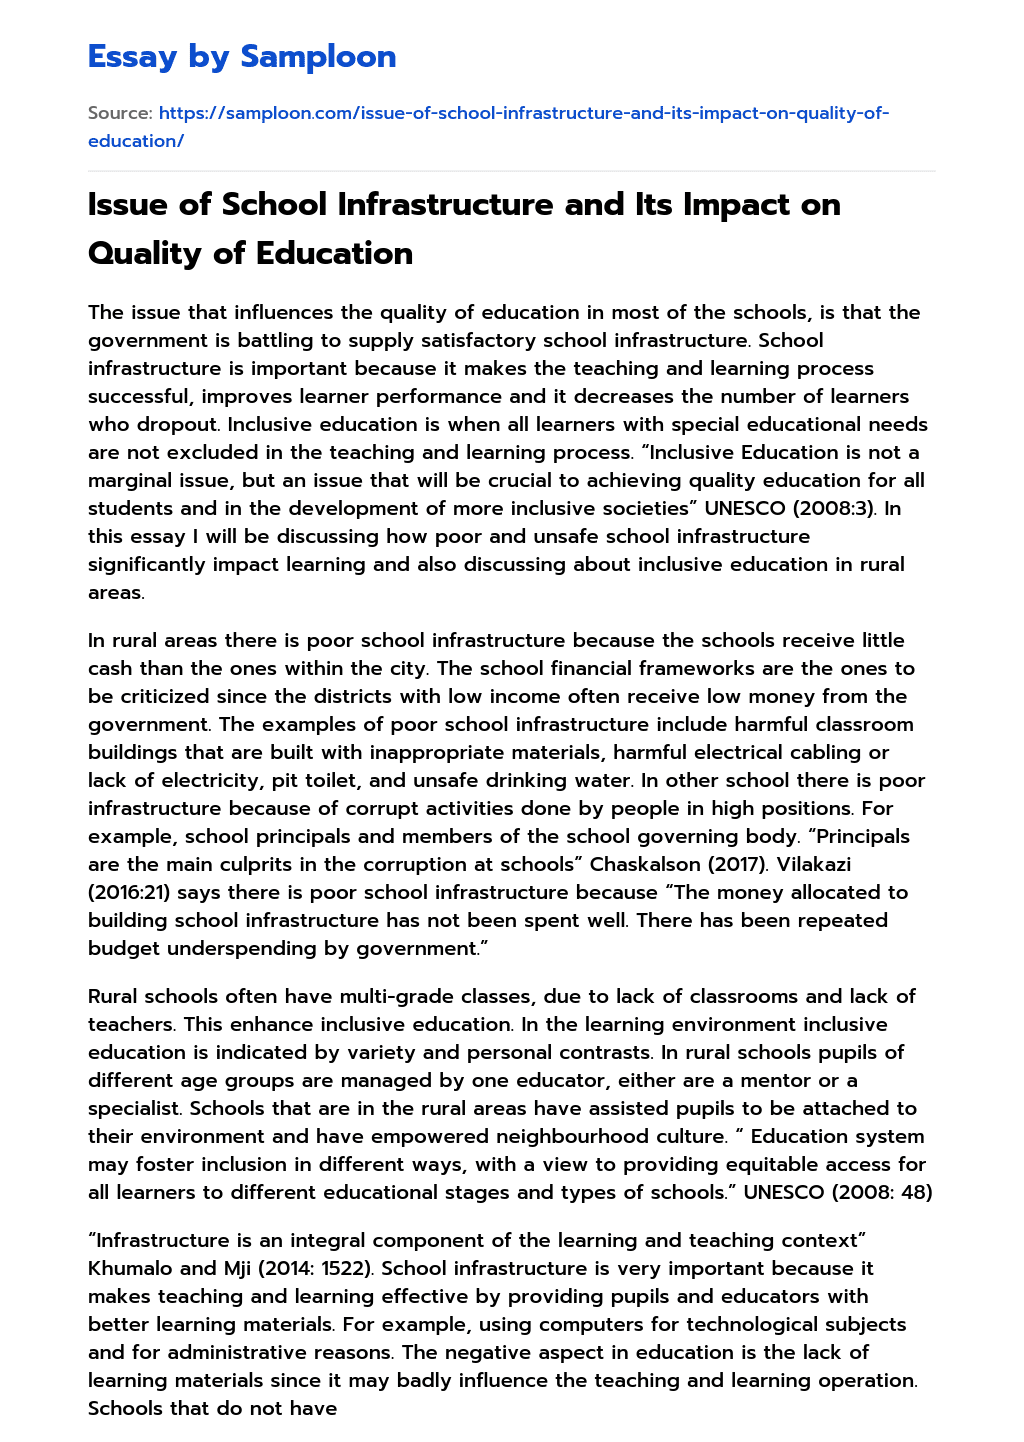 online education quality issues essay